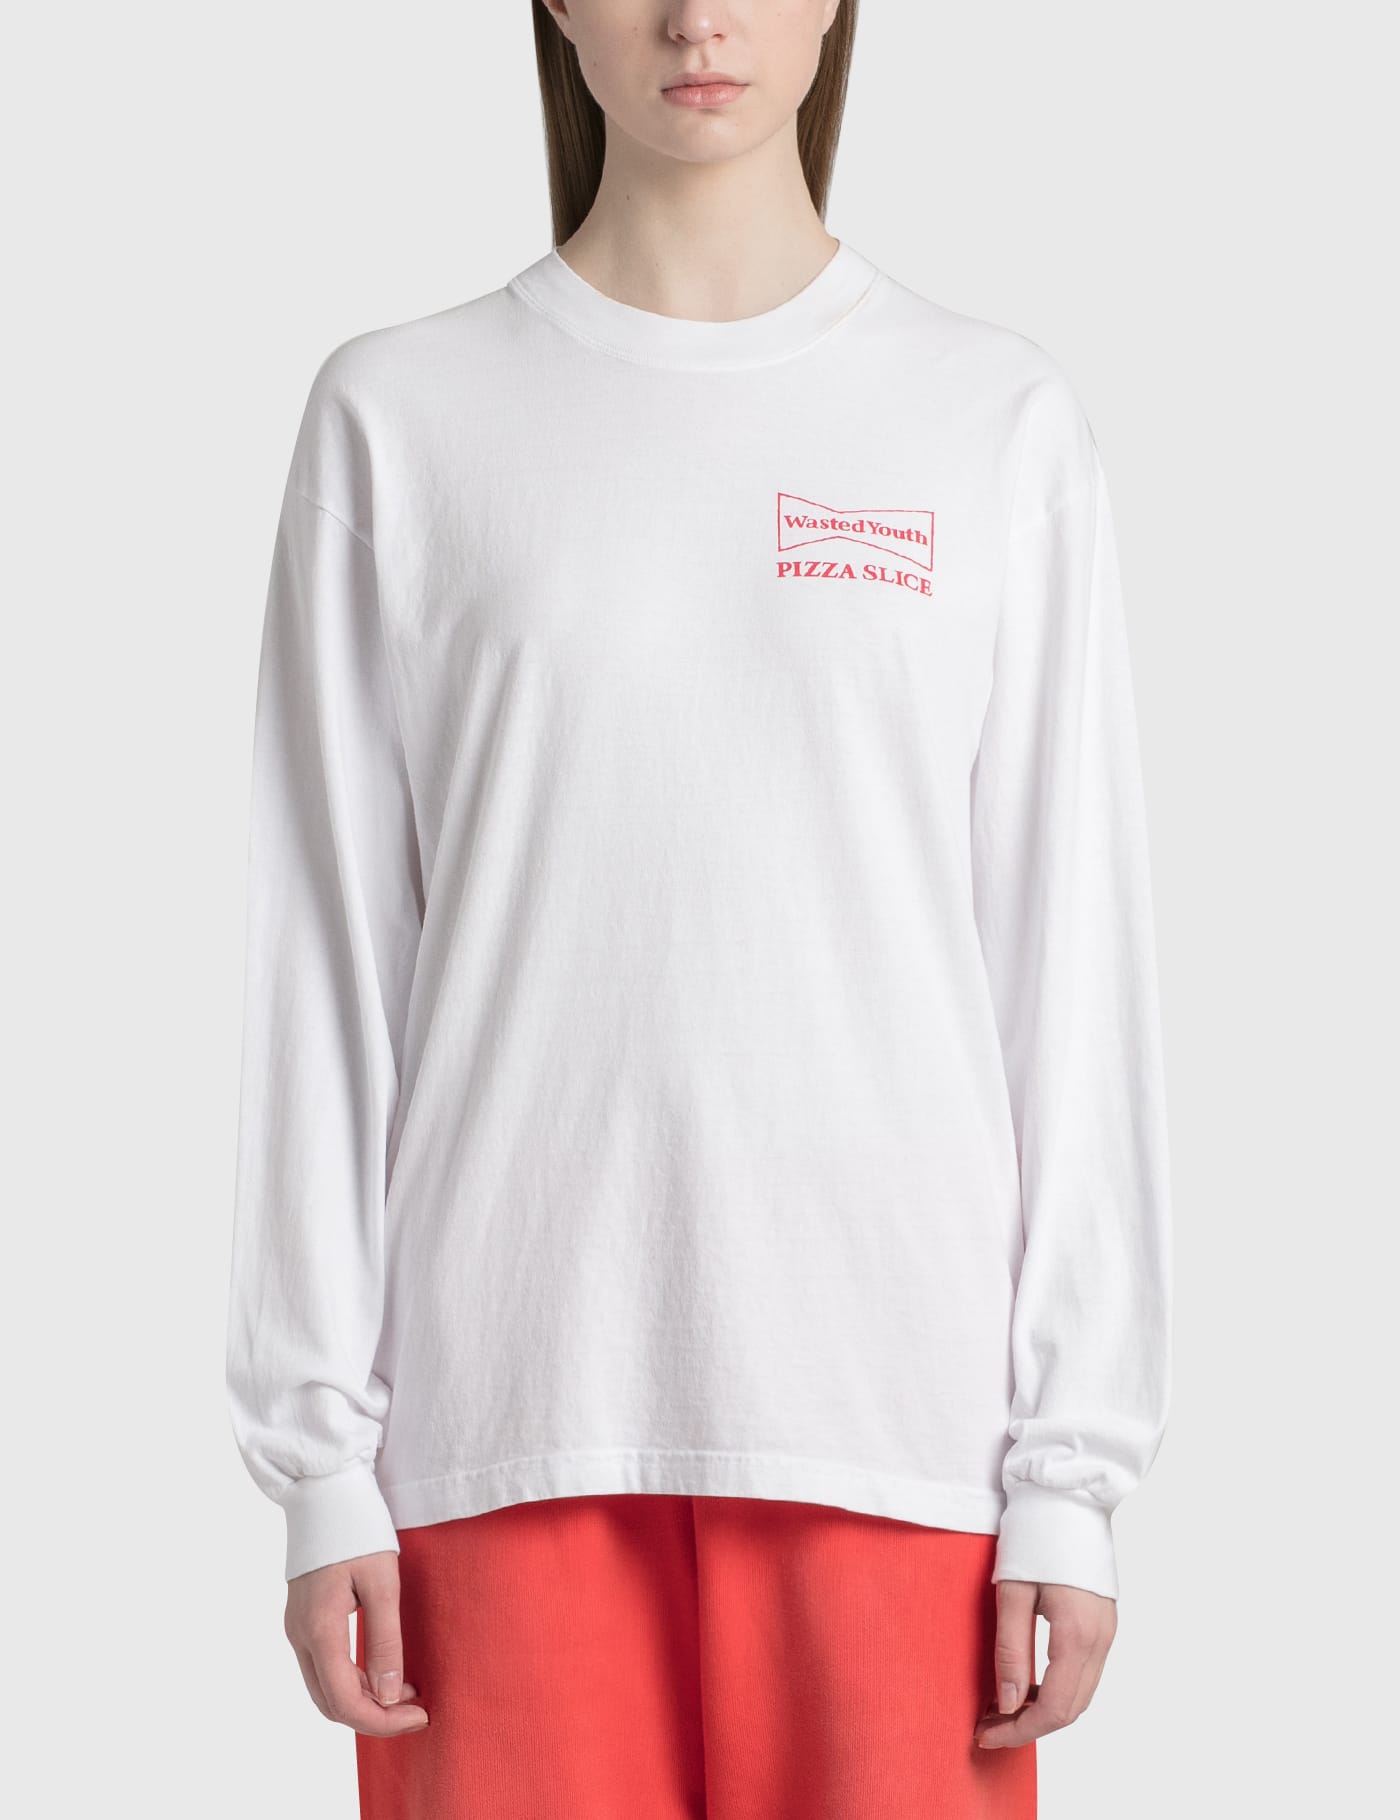 Wasted Youth - Wasted Youth x Pizza Slice Long Sleeve T-shirt 